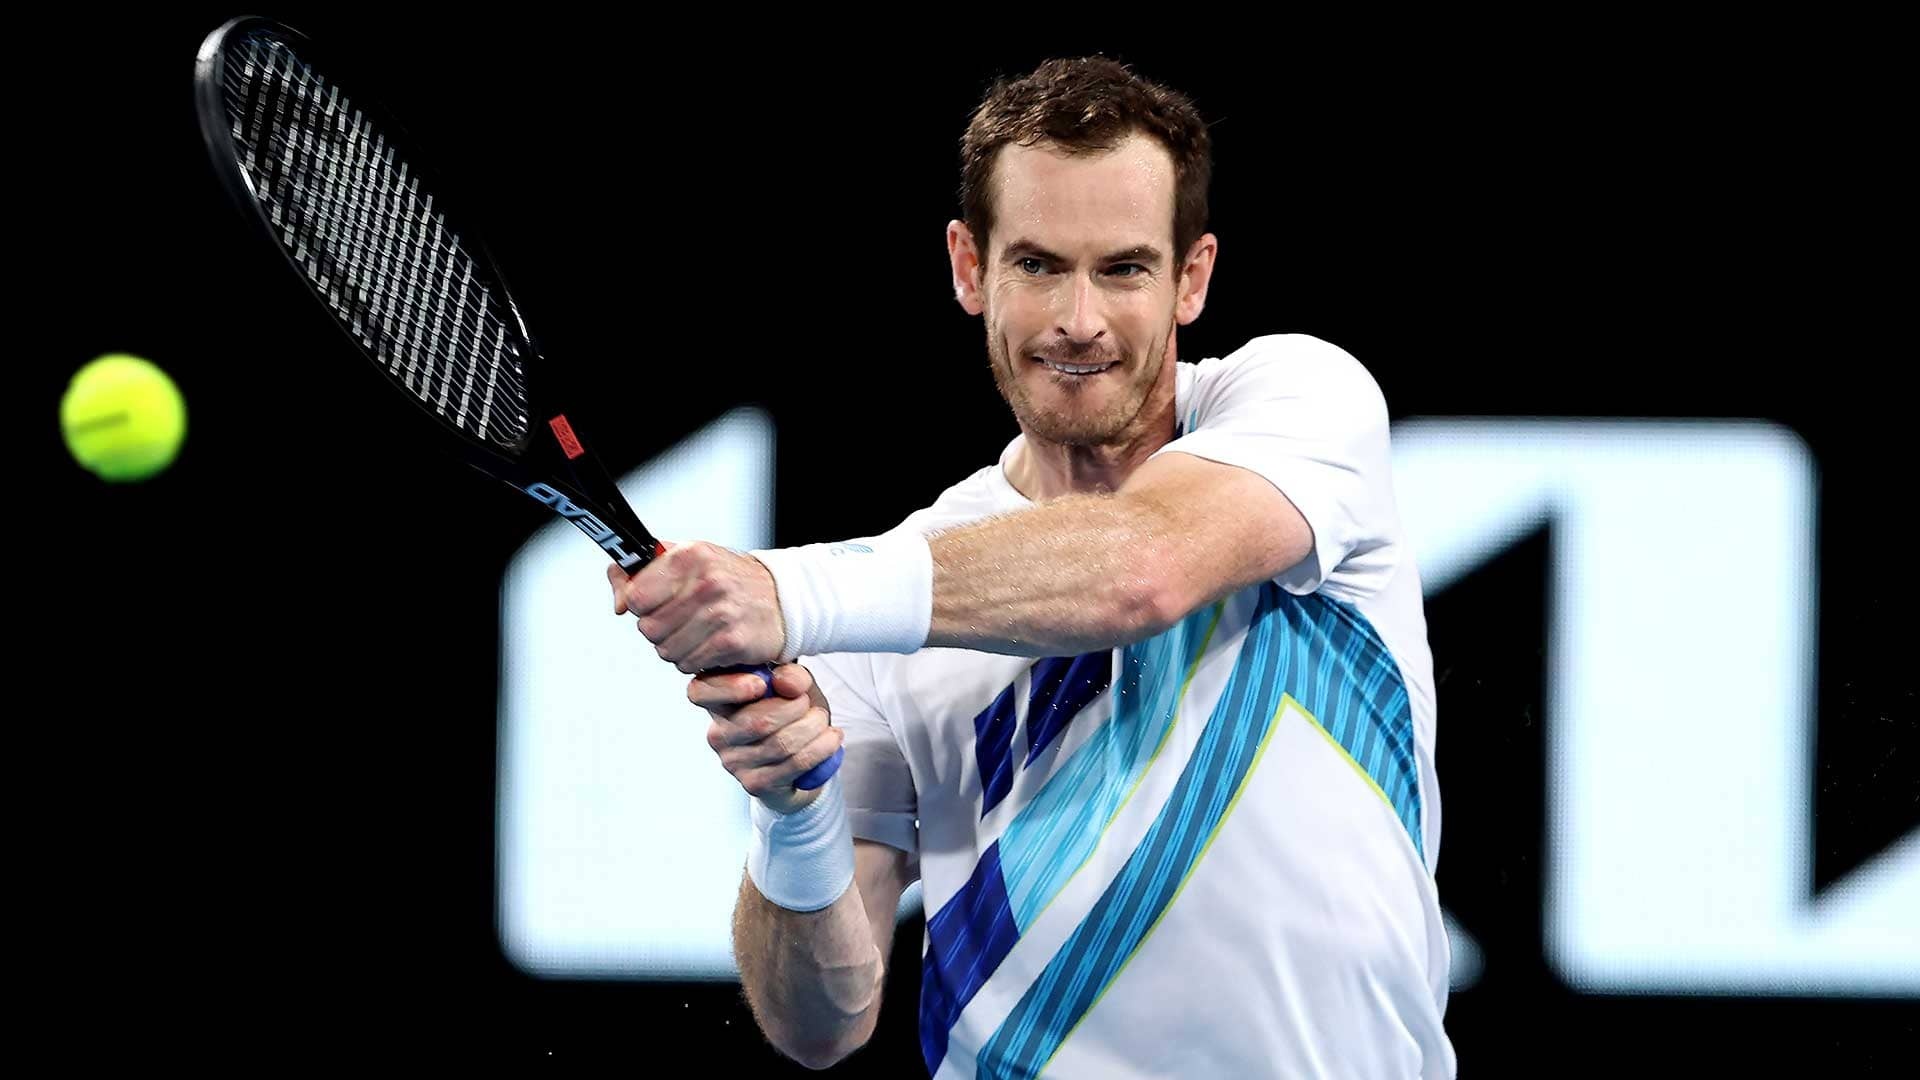 Andy Murray, Retirement considerations, Careful planning, Future in tennis, 1920x1080 Full HD Desktop